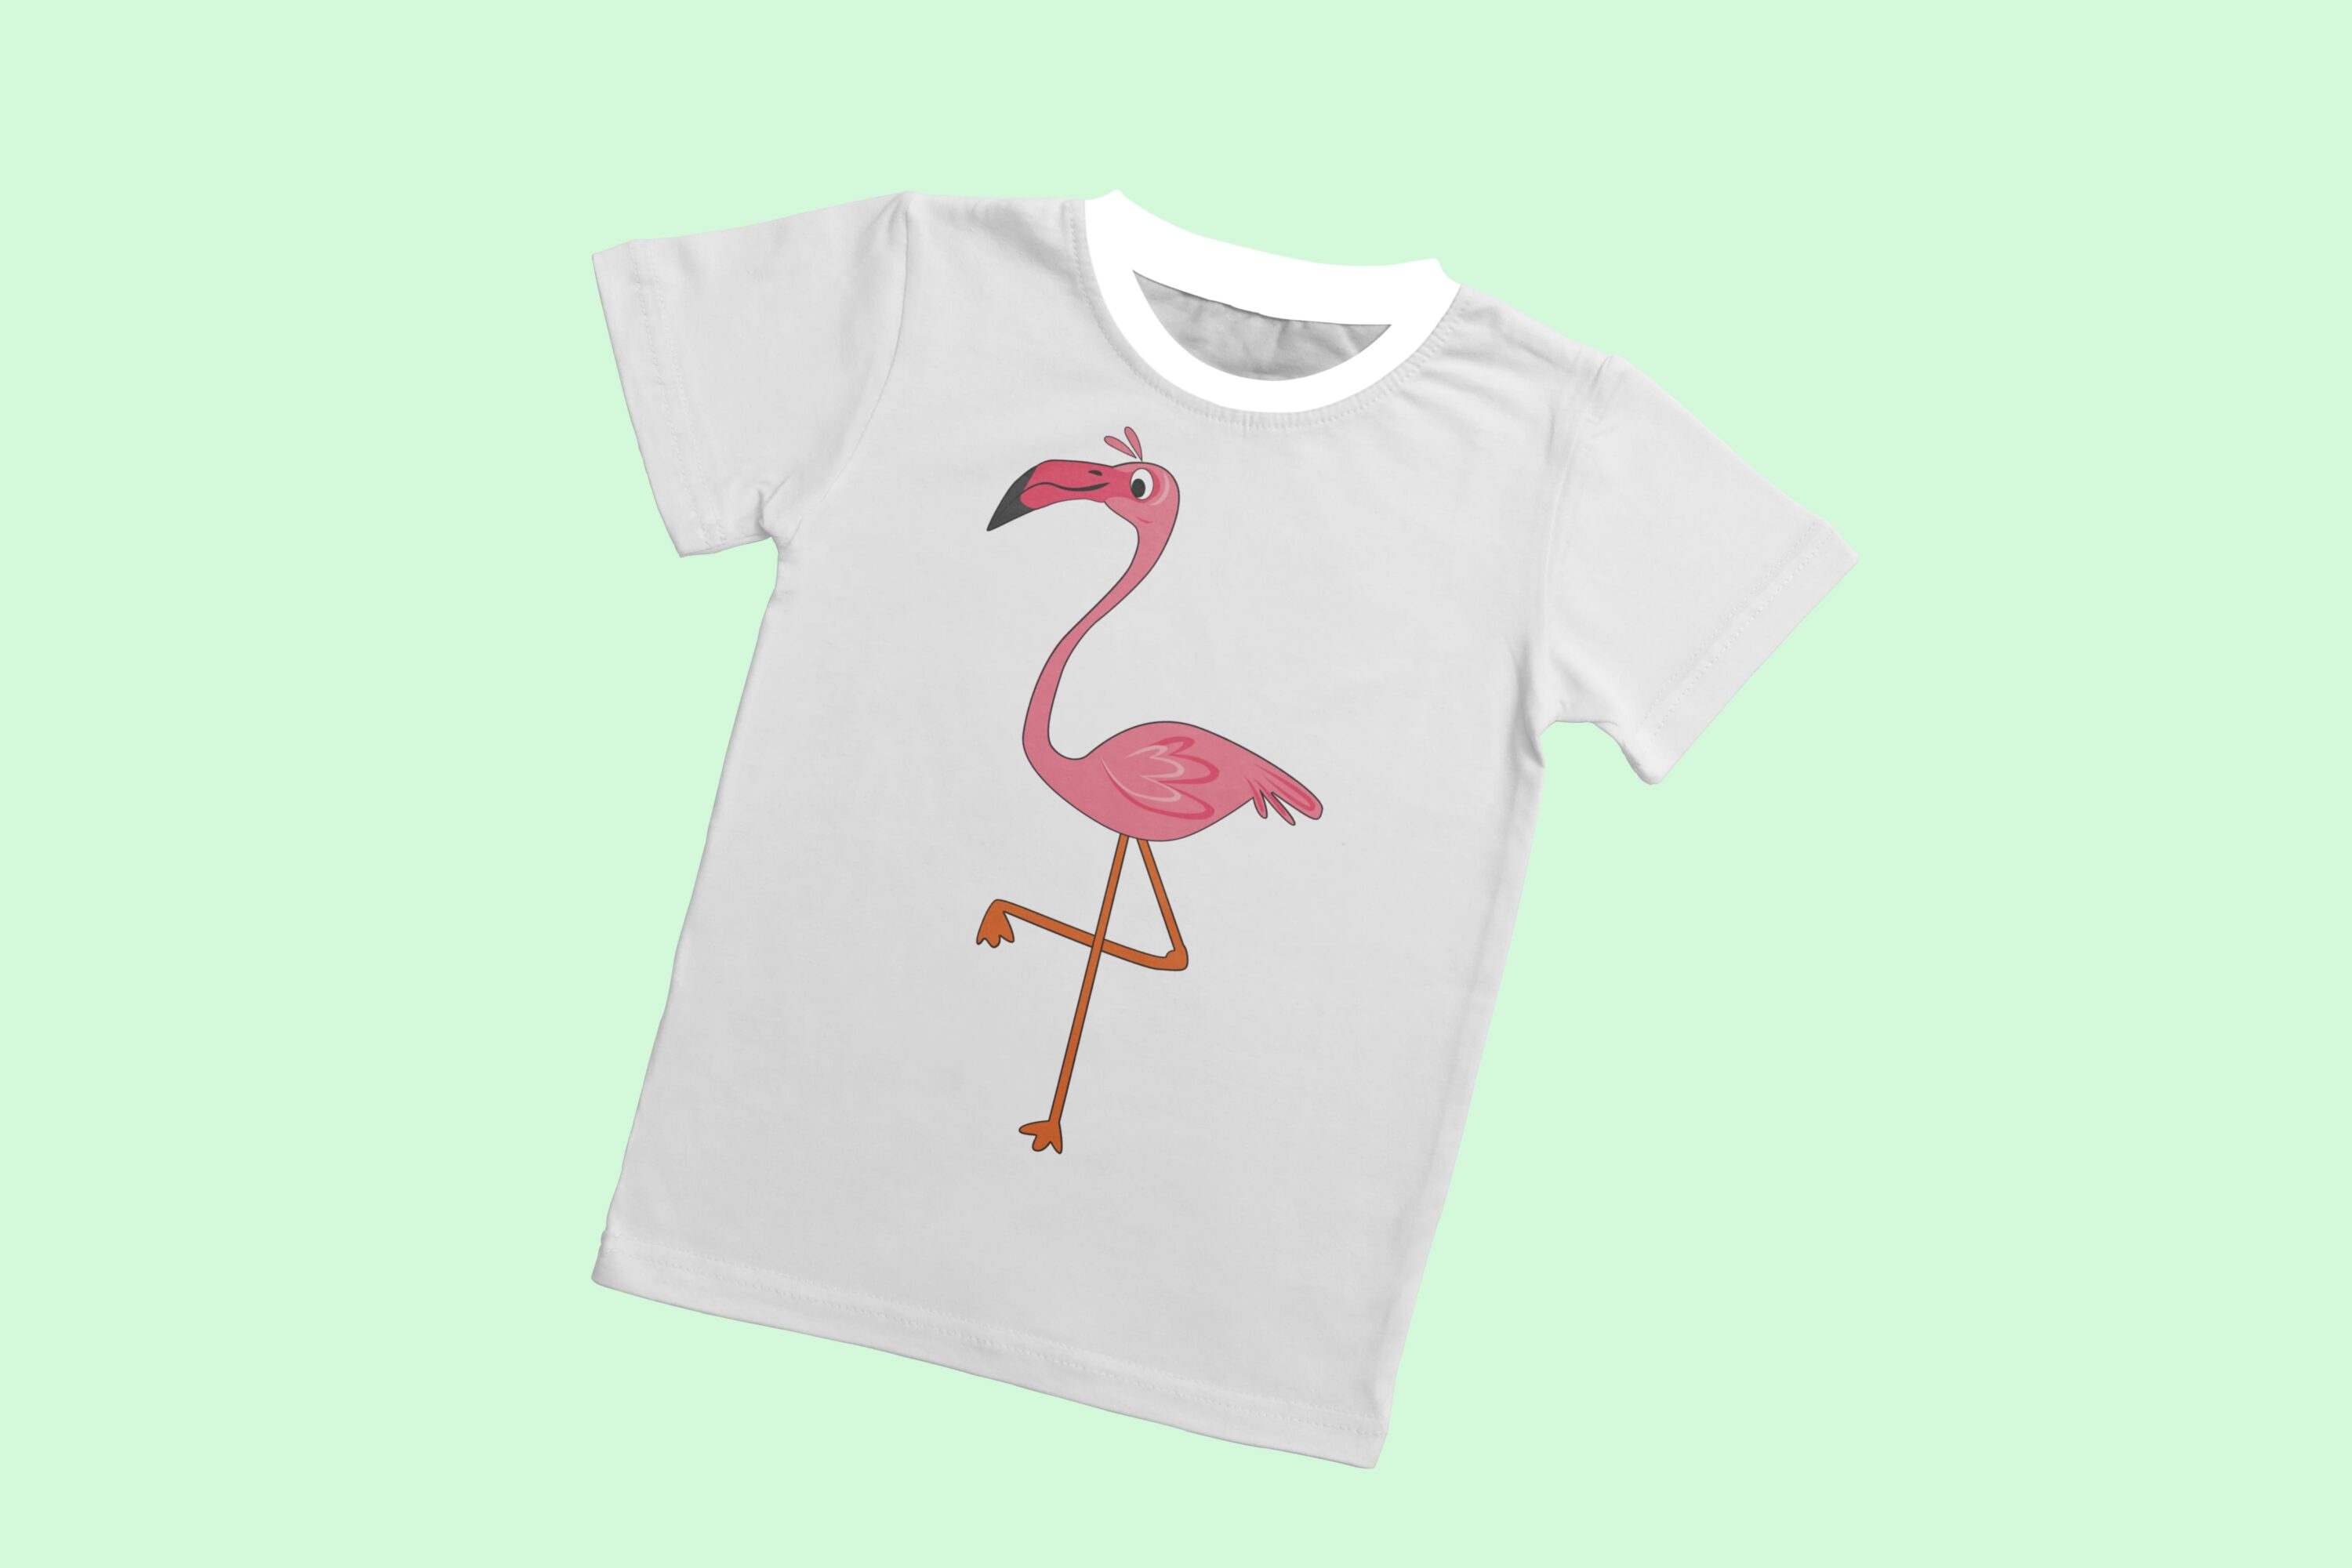 Funny pink flamingo for your t-shirt.